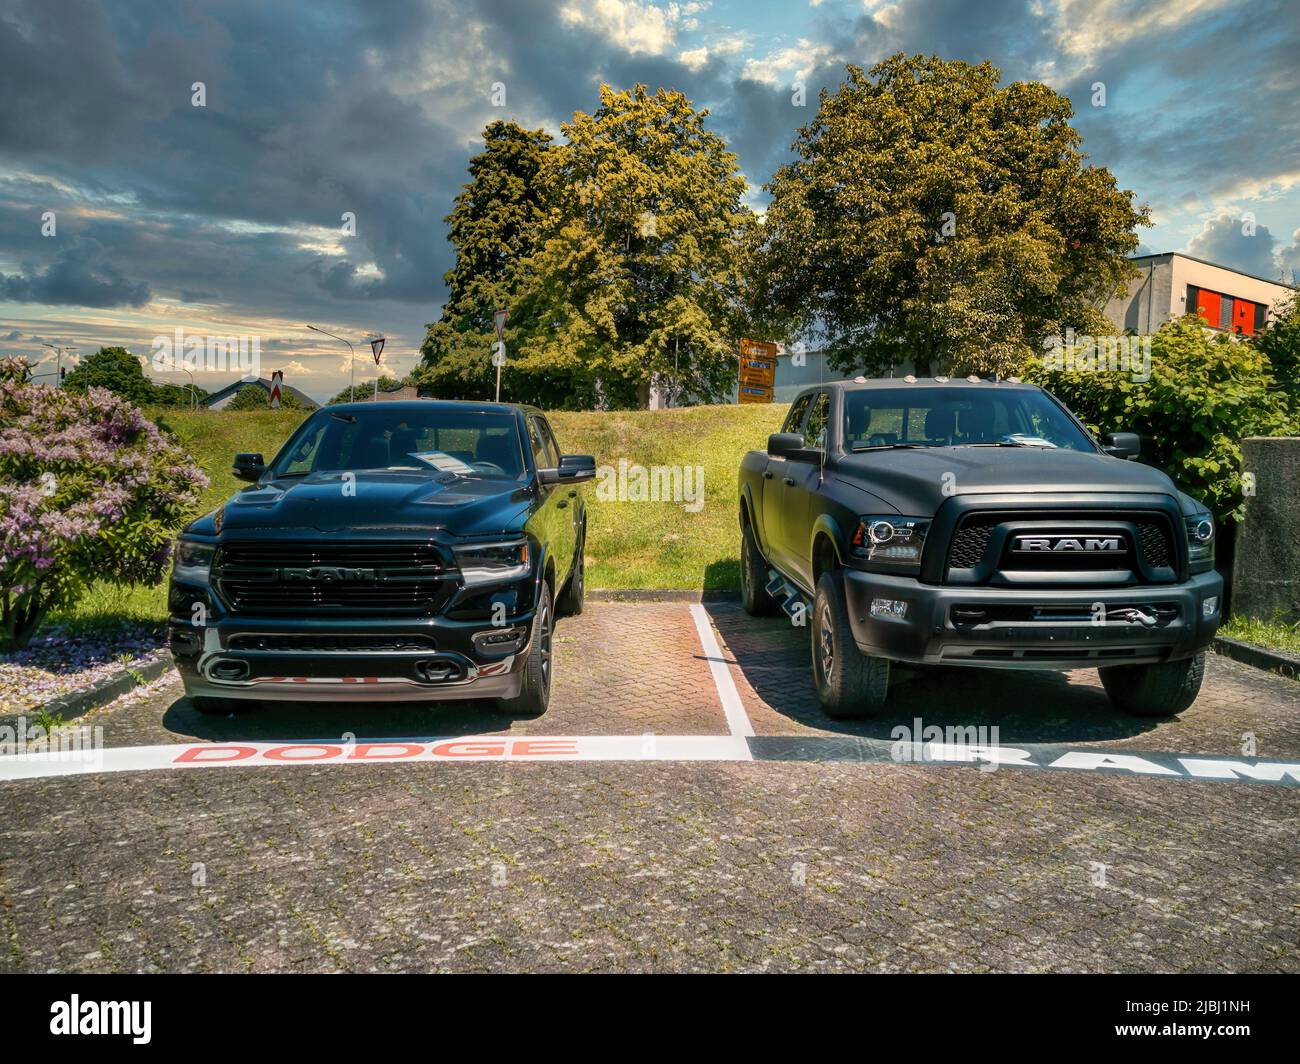 Gummersbach, Germany - June 13, 2021: Two Dodge Ram pickup trucks are for sale at a car dealership in Gummersbach. Stock Photo